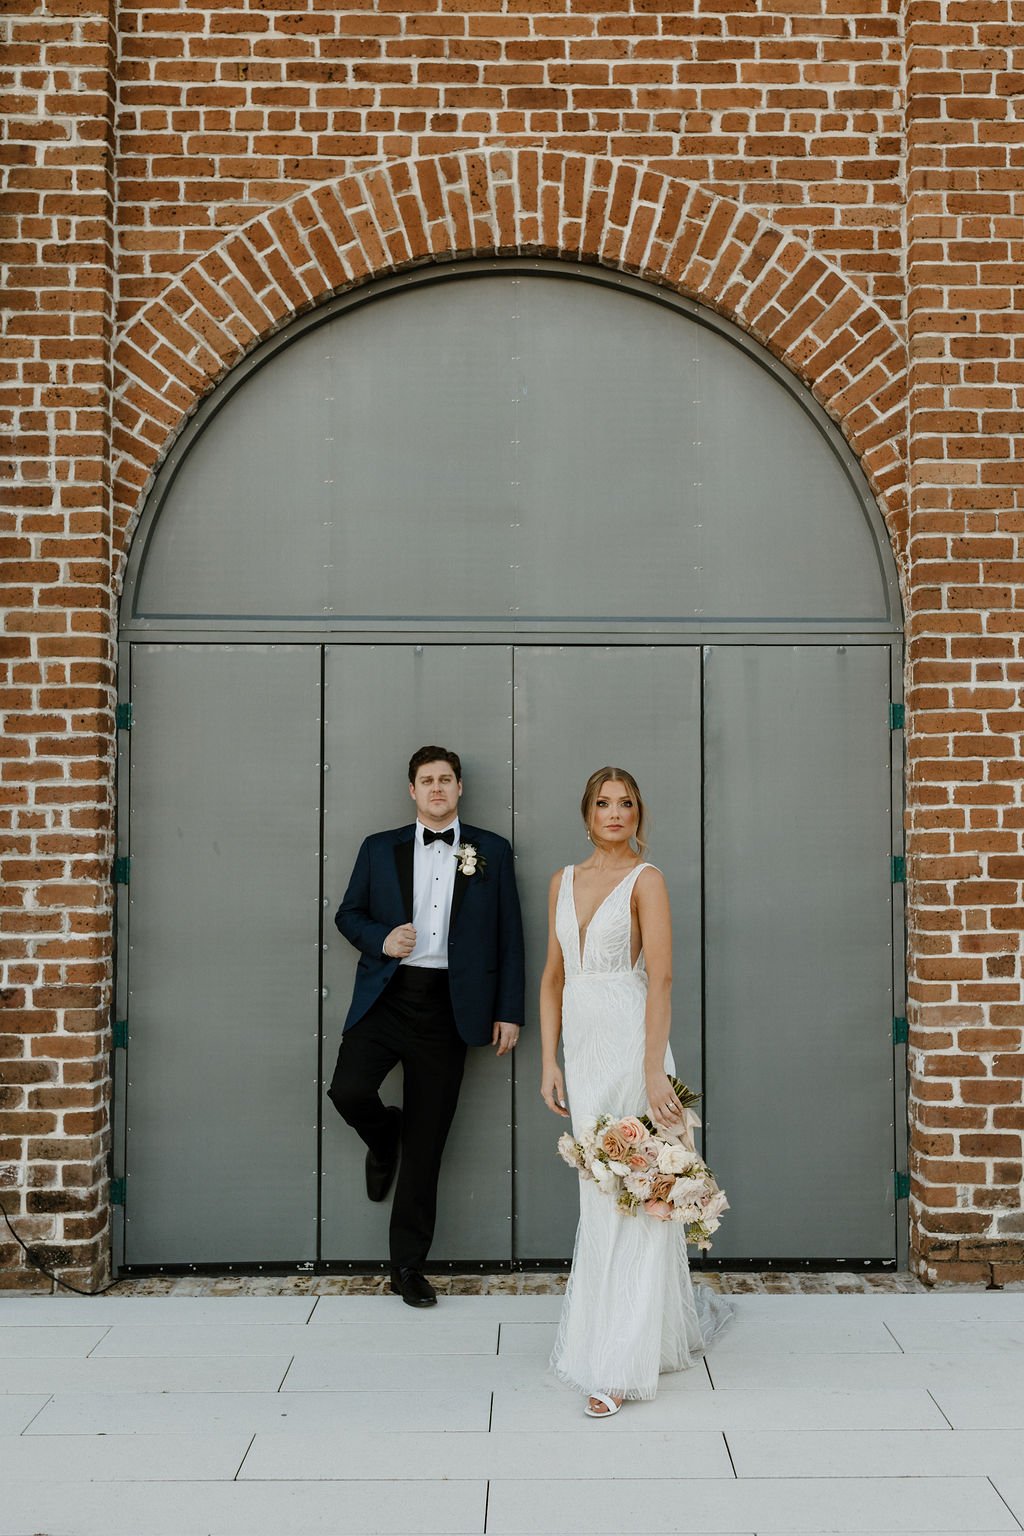 olivia-and-ryans-modern-industrial-chic-savannah-wedding-at-kehoe-iron-works-planned-by-savannah-wedding-planner-and-florist-ivory-and-beau-43.jpg